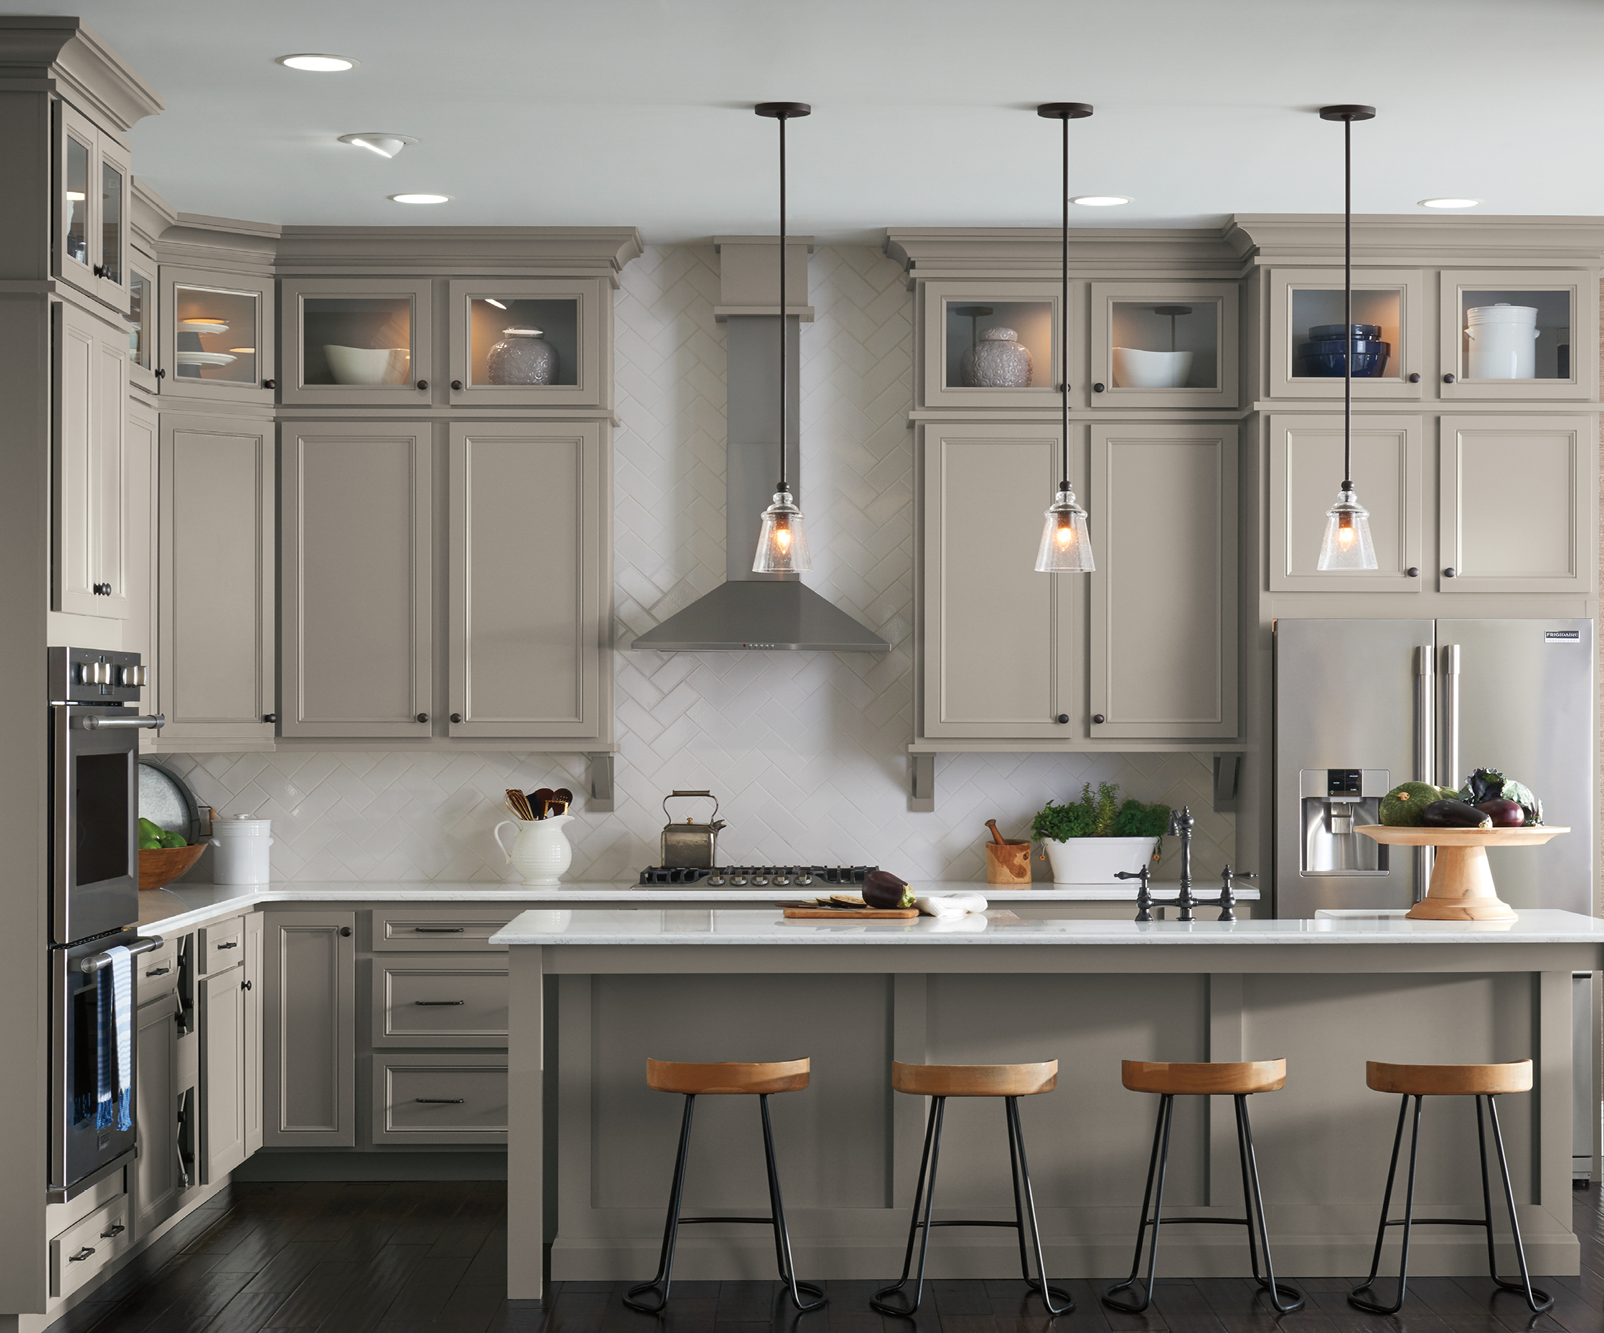 A Designer’s Advice When Creating Your Custom Kitchen